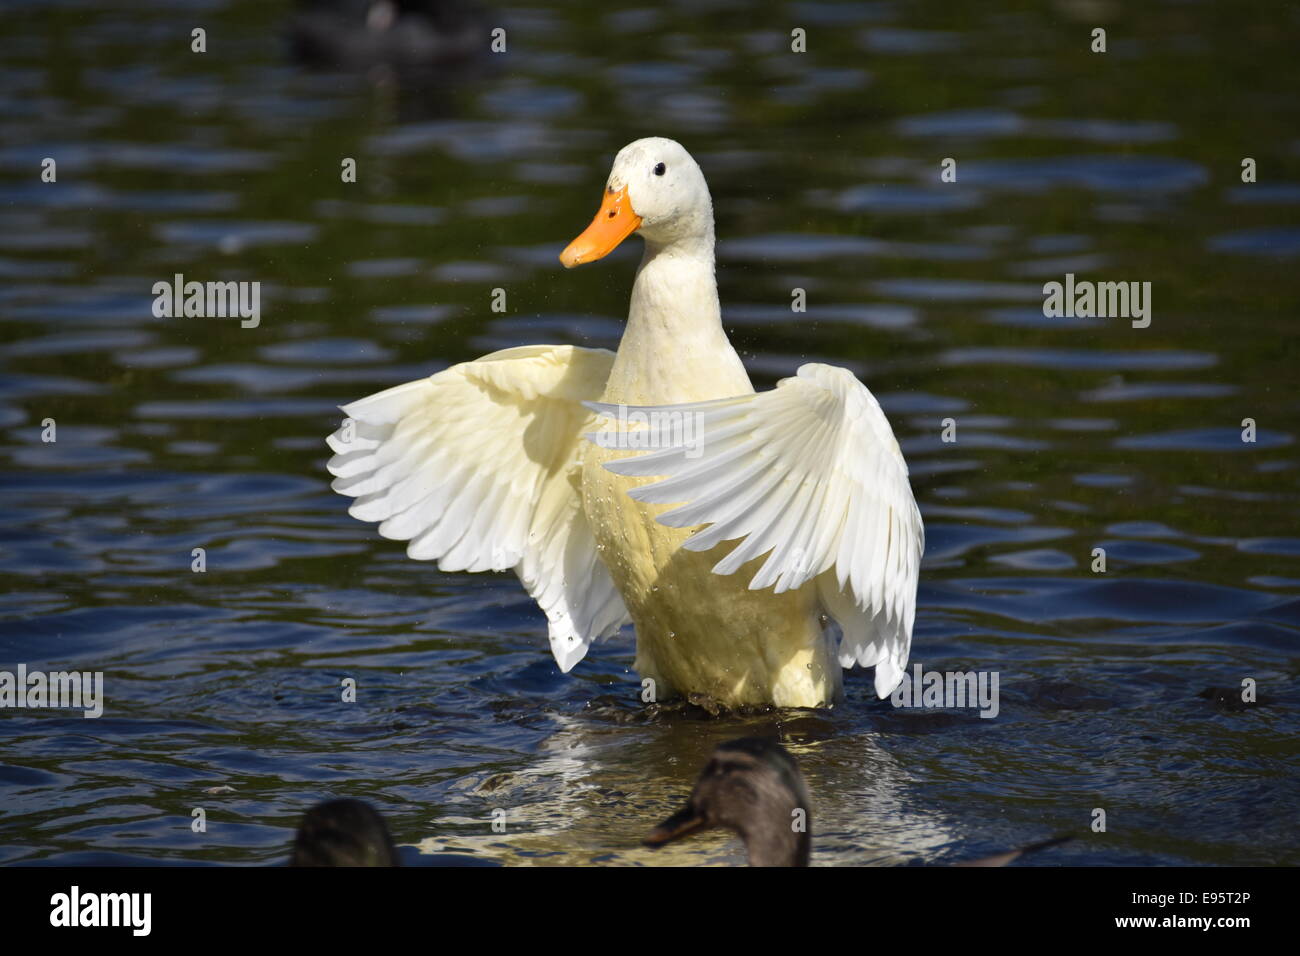 A white Duck flapping its wings on a lake with a yellow beak Stock Photo